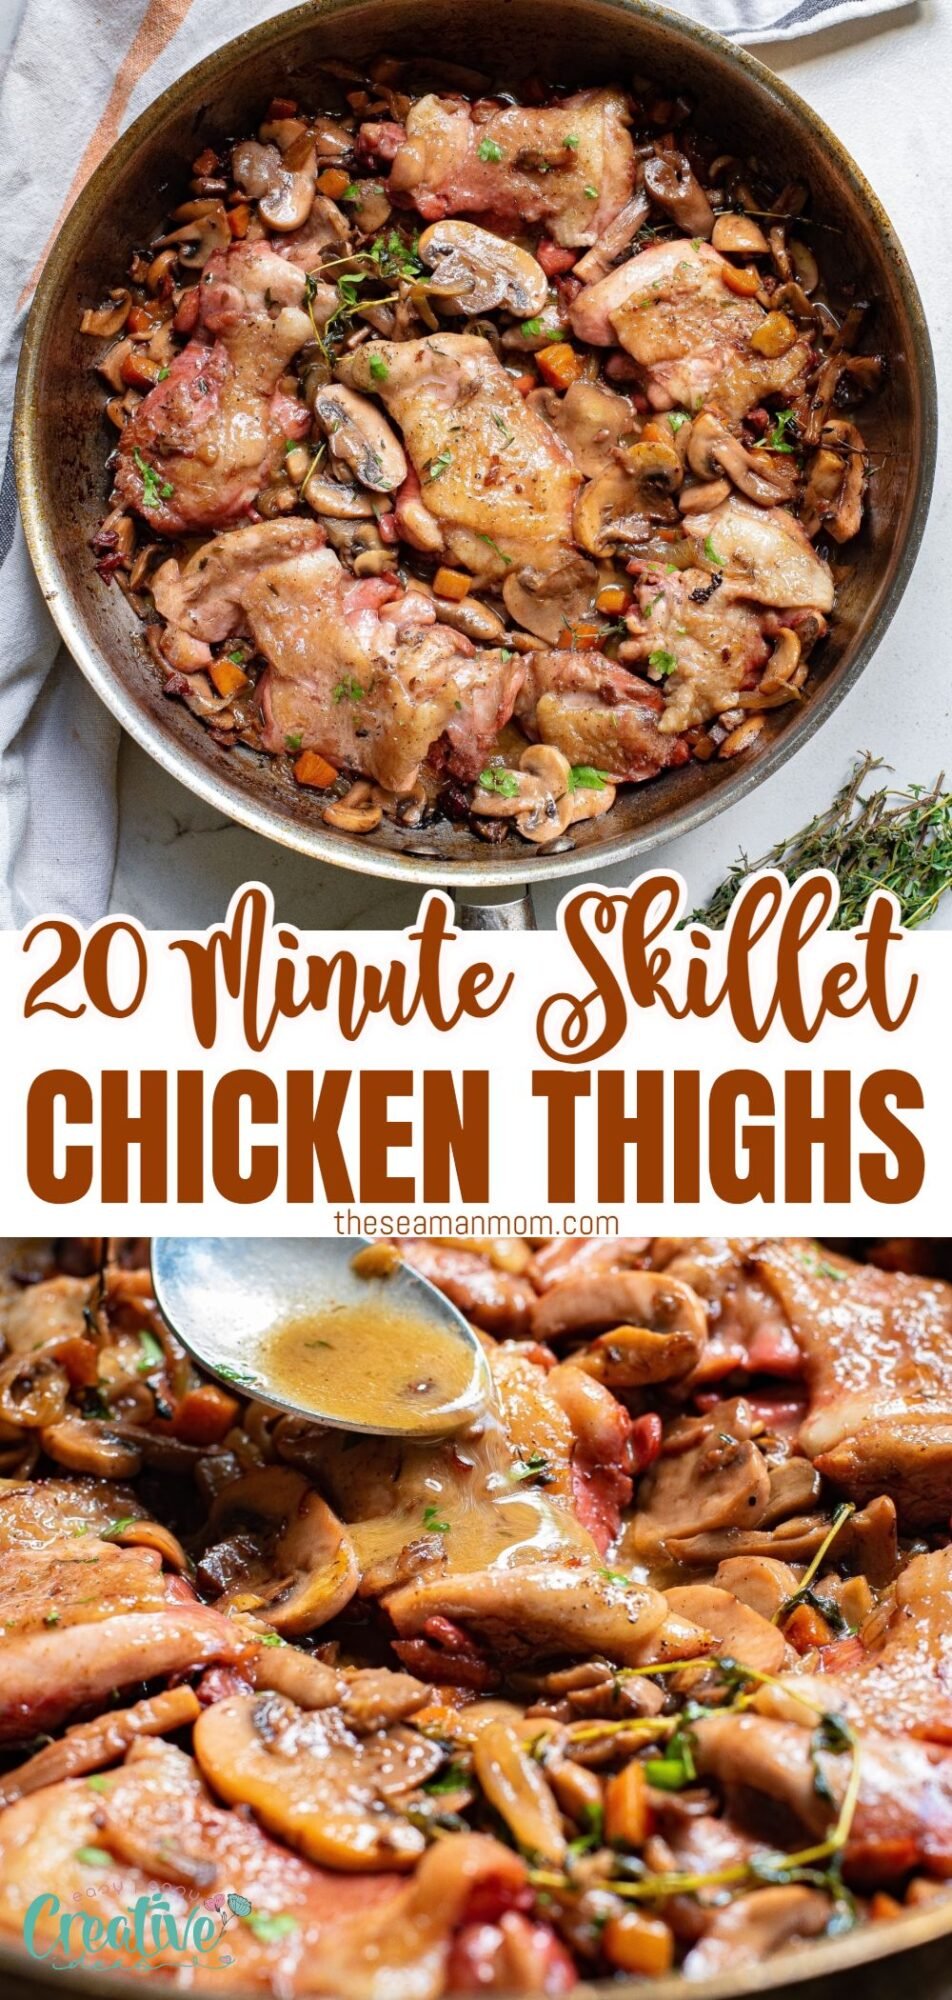 Skillet chicken thighs cooked in 20 minutes